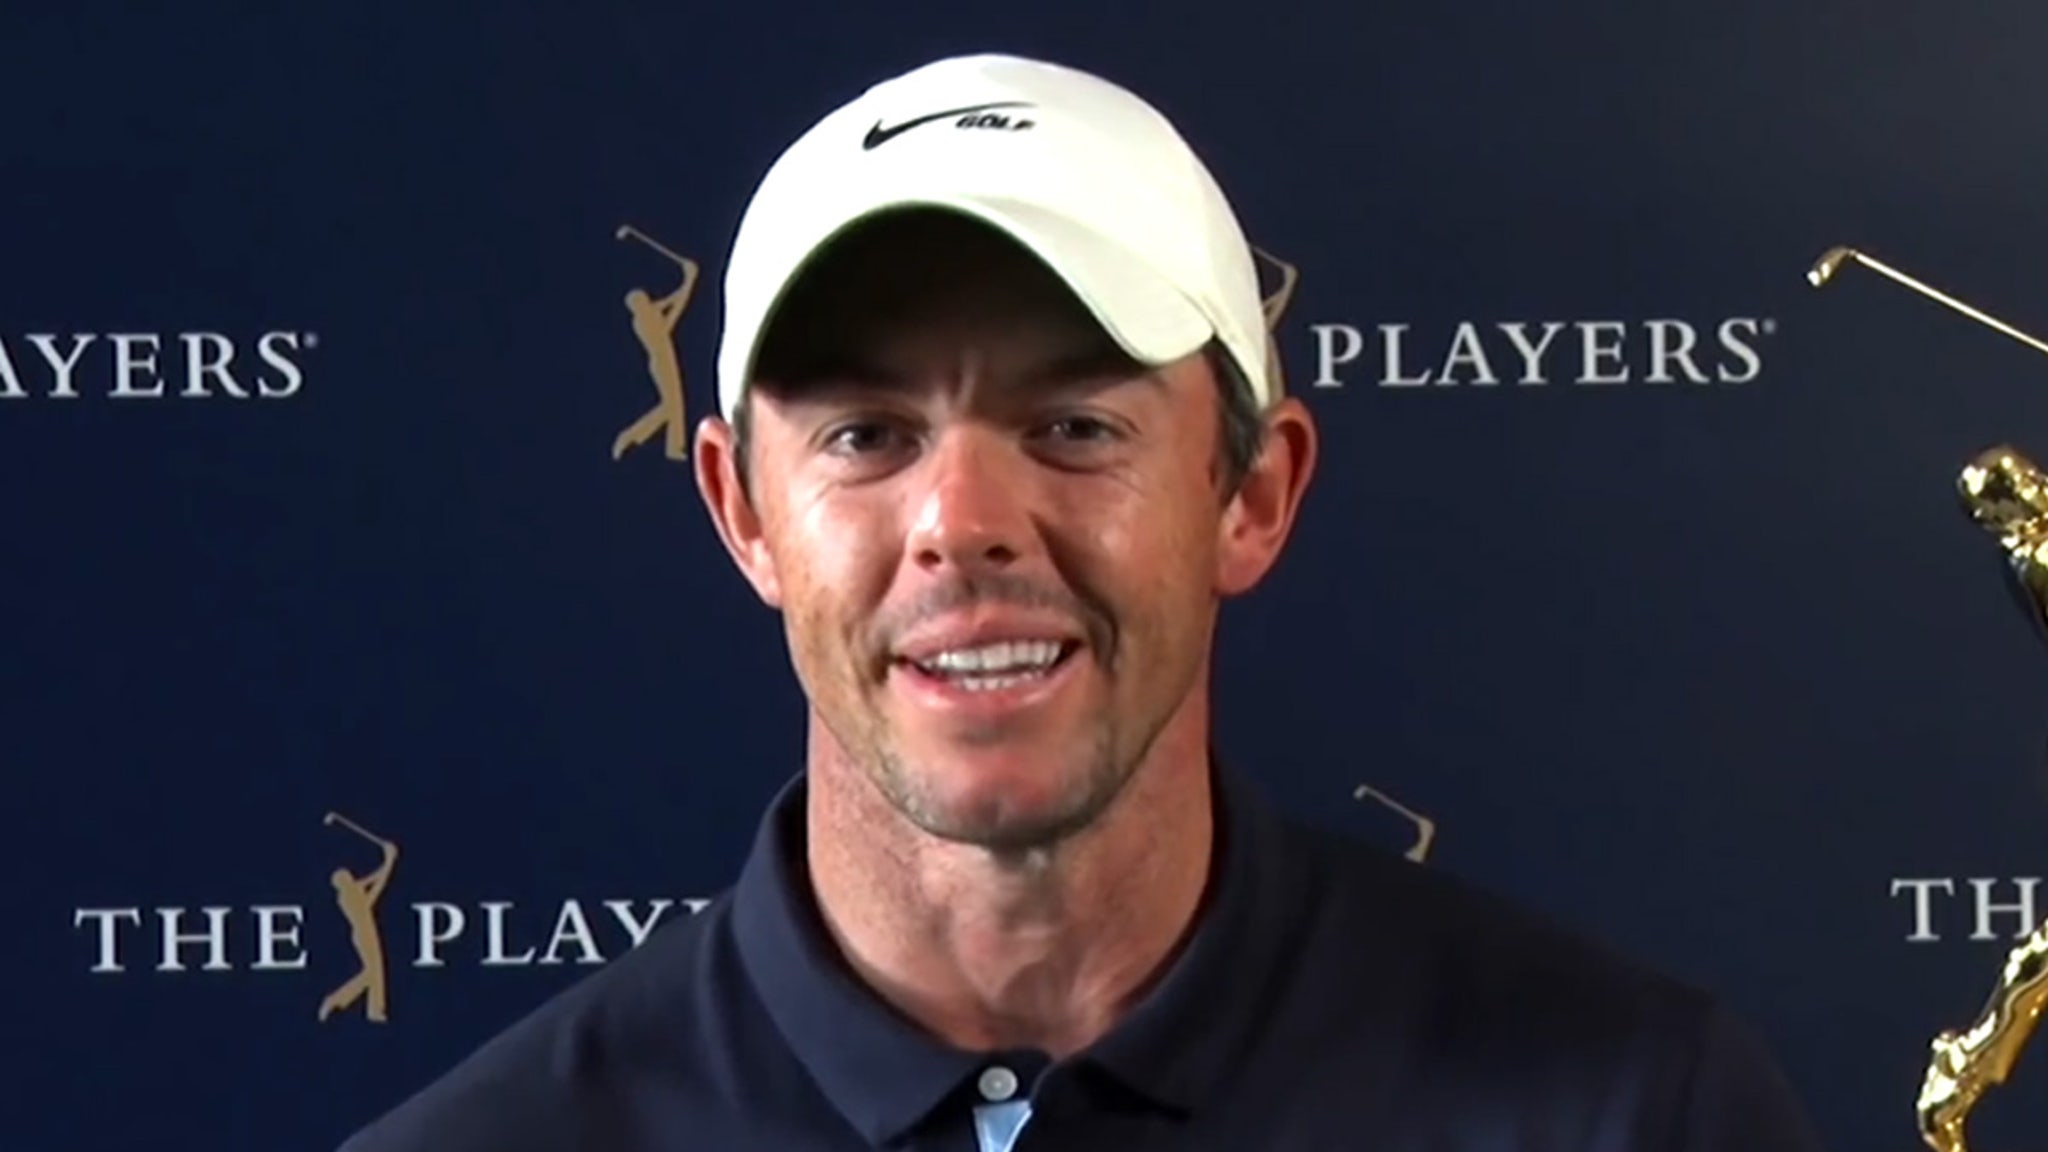 Rory McIlroy says Tiger Woods ‘is doing better’, may return home next week